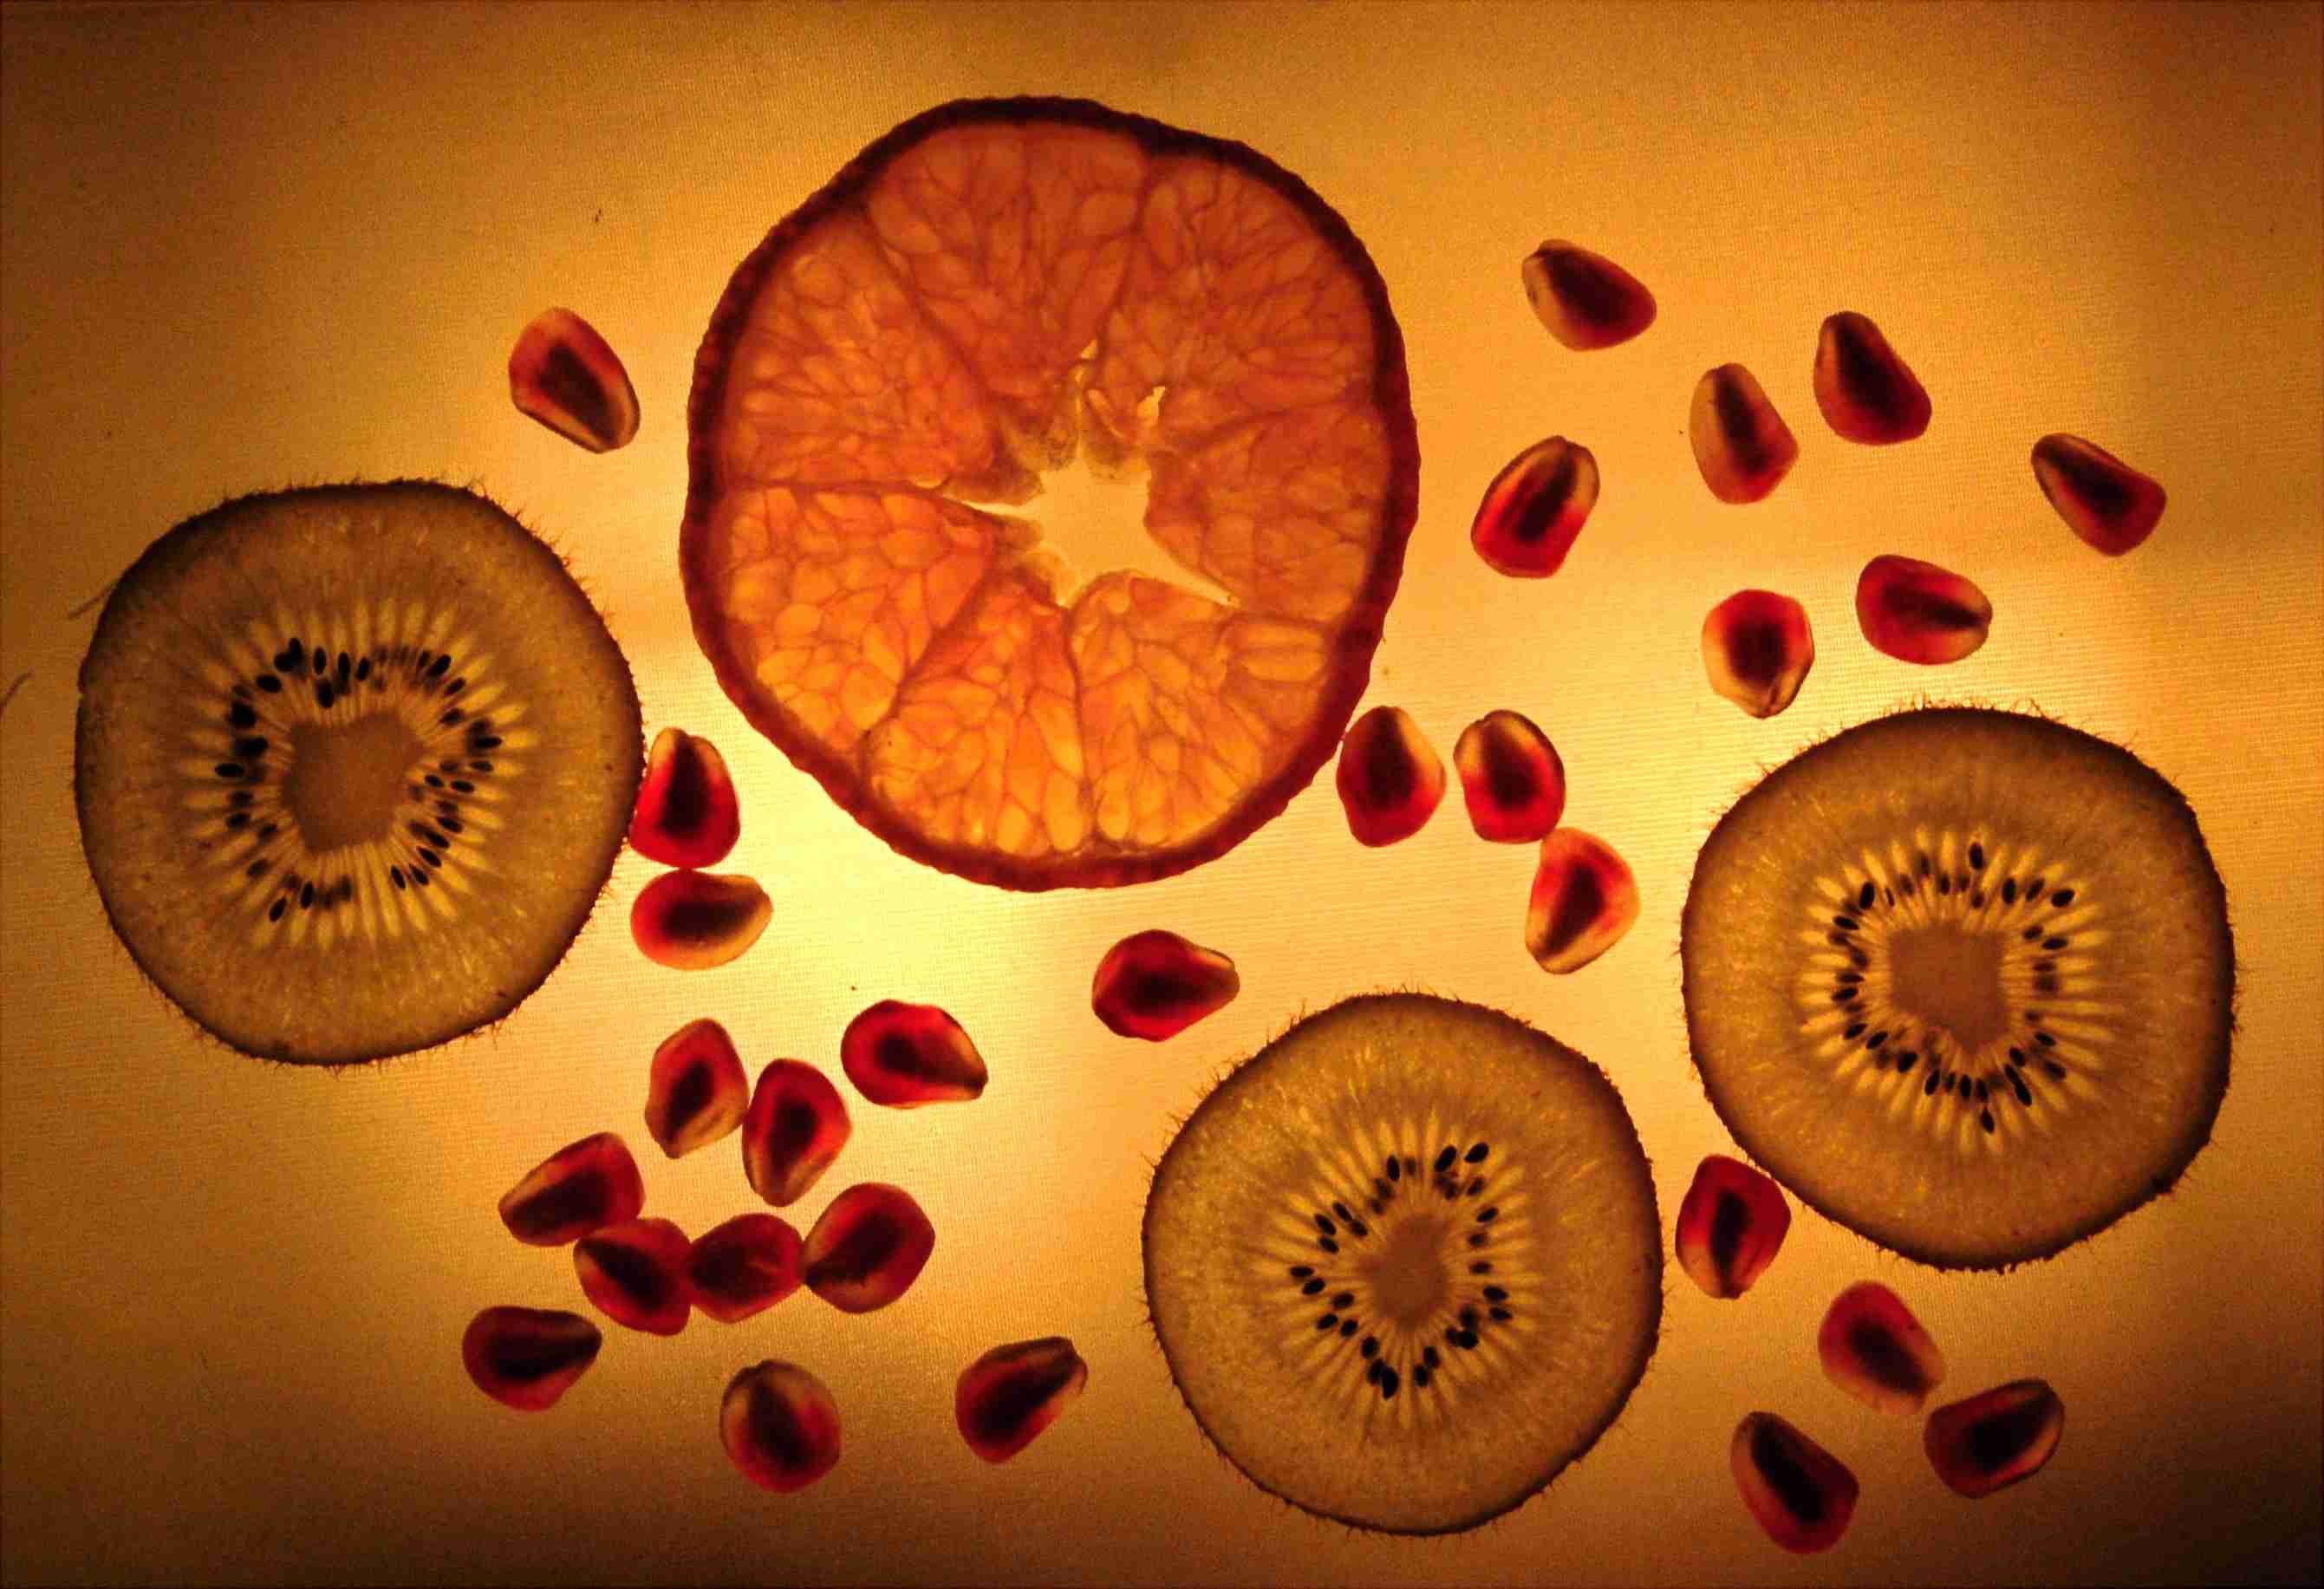 a group of fruit slices and seeds